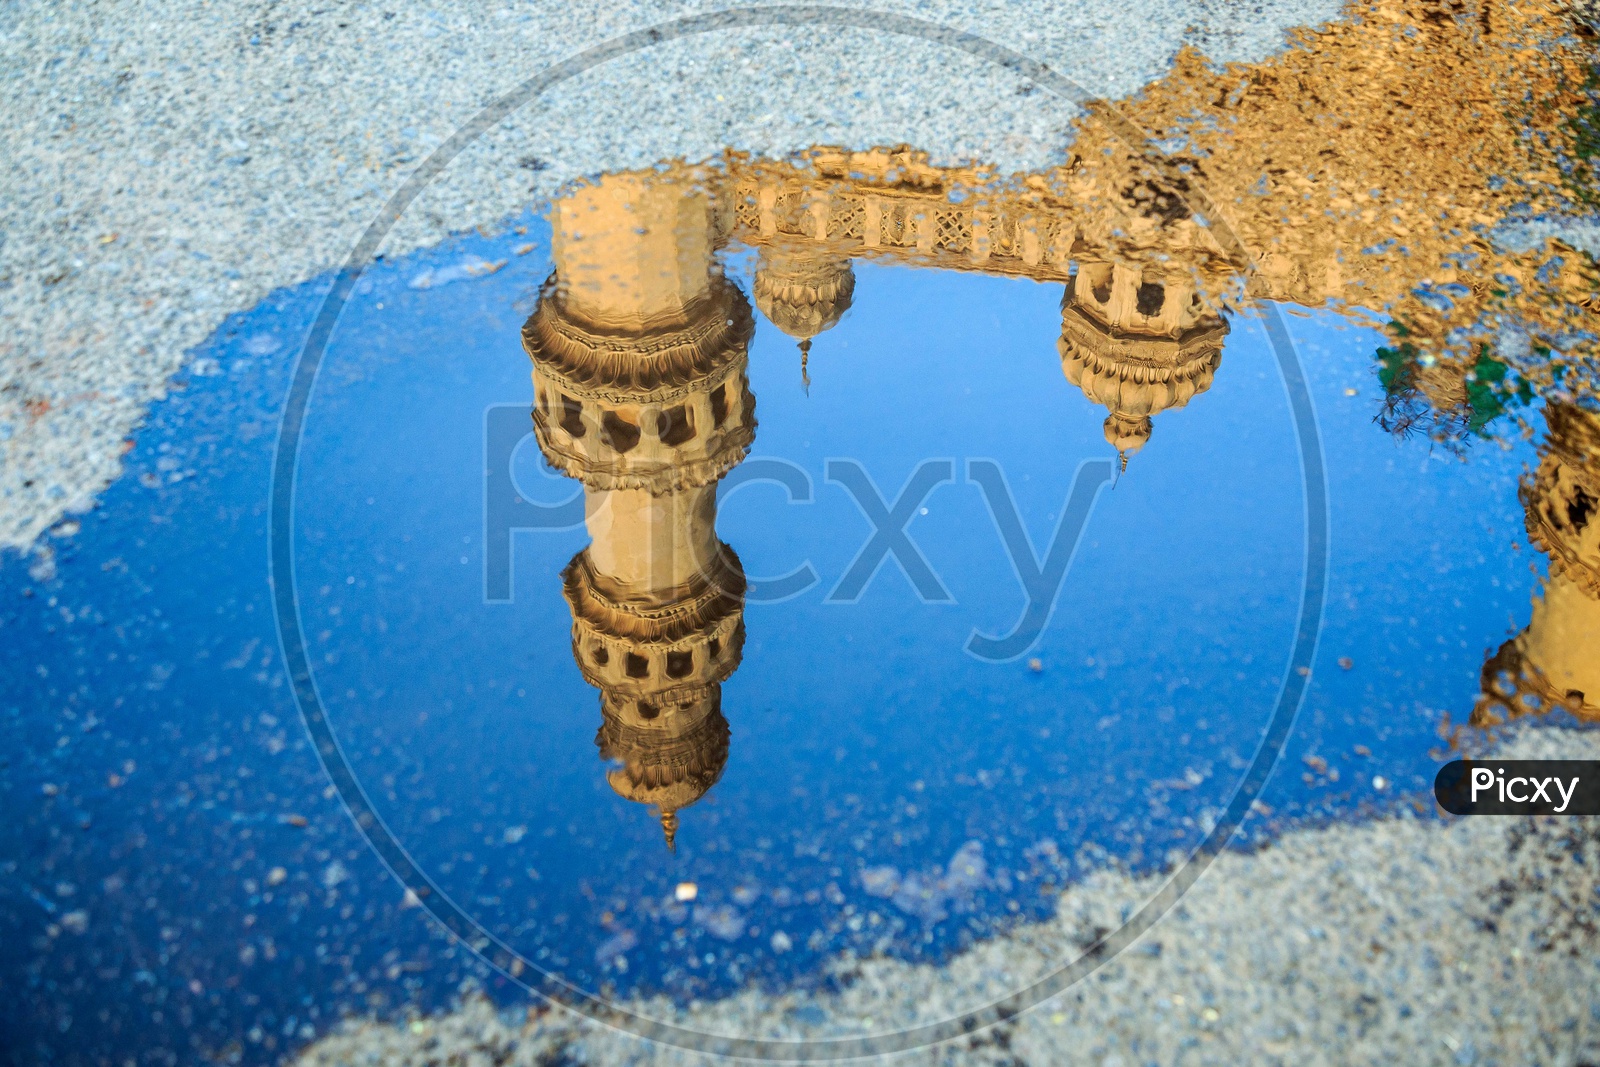 Reflection of Charminar on the stagnant water of a Road